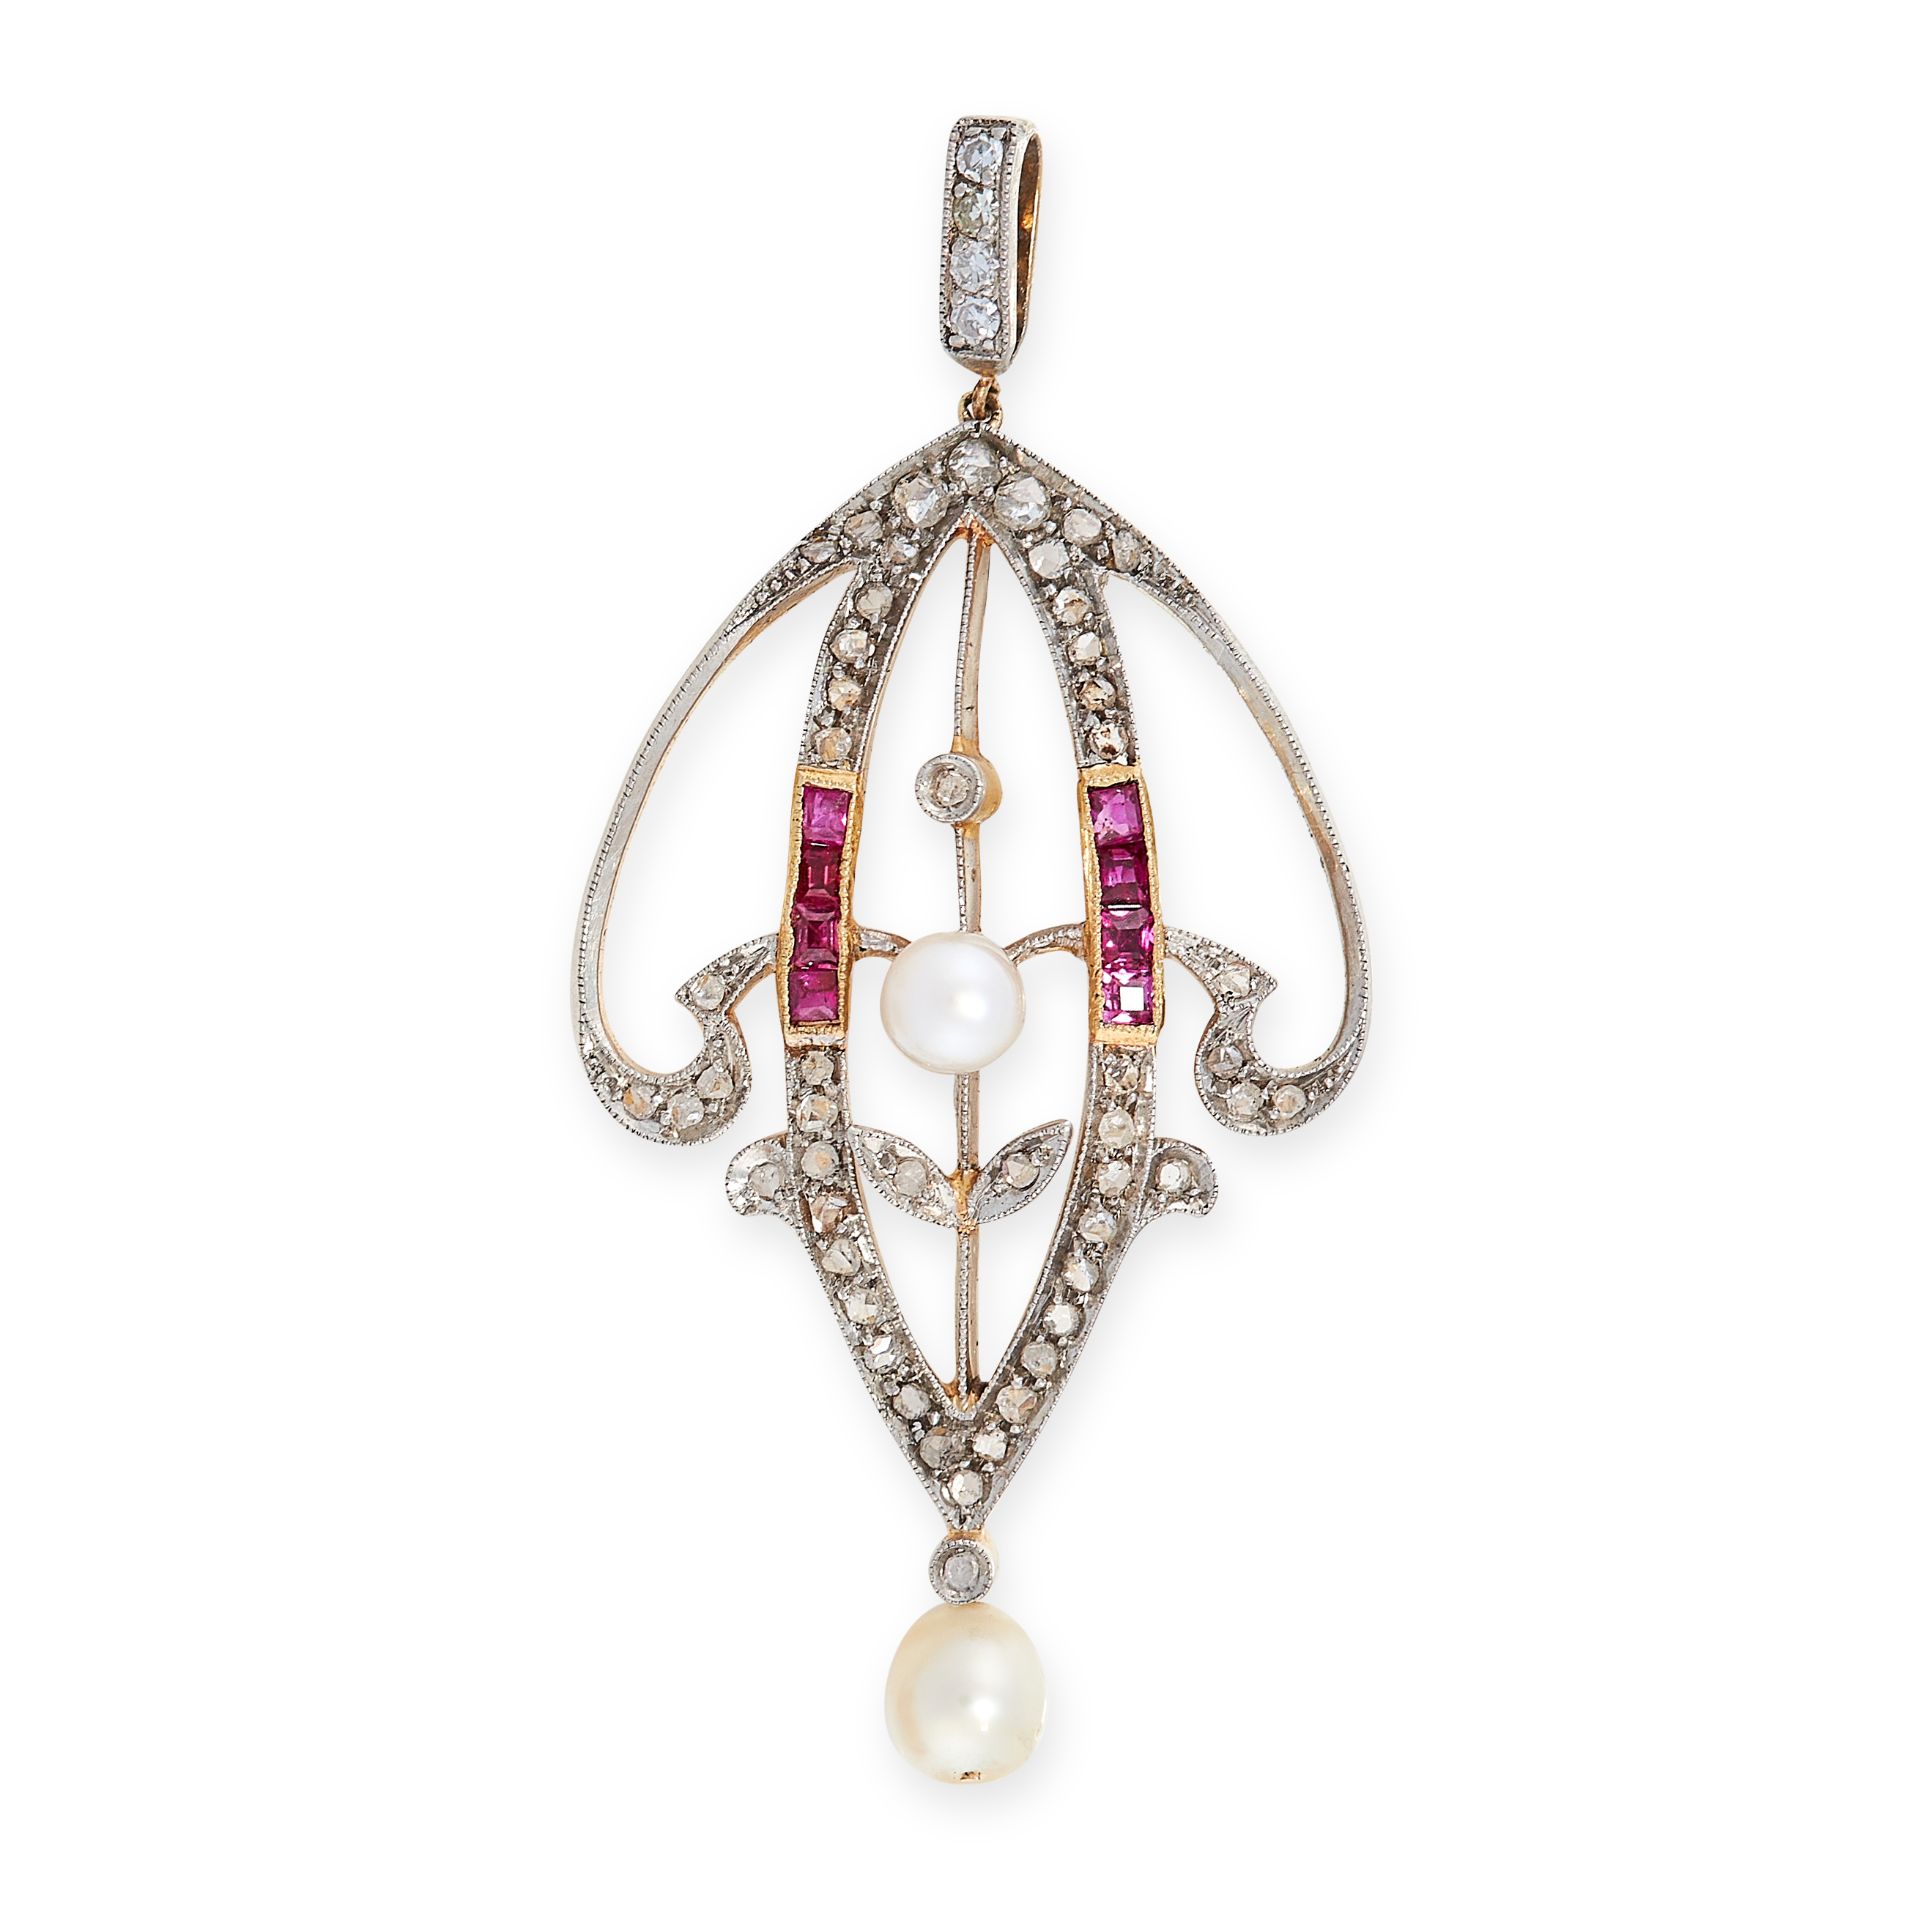 A BELLE EPOQUE DIAMOND, PEARL AND RUBY PENDANT, EARLY 20TH CENTURY the openwork body set with rows